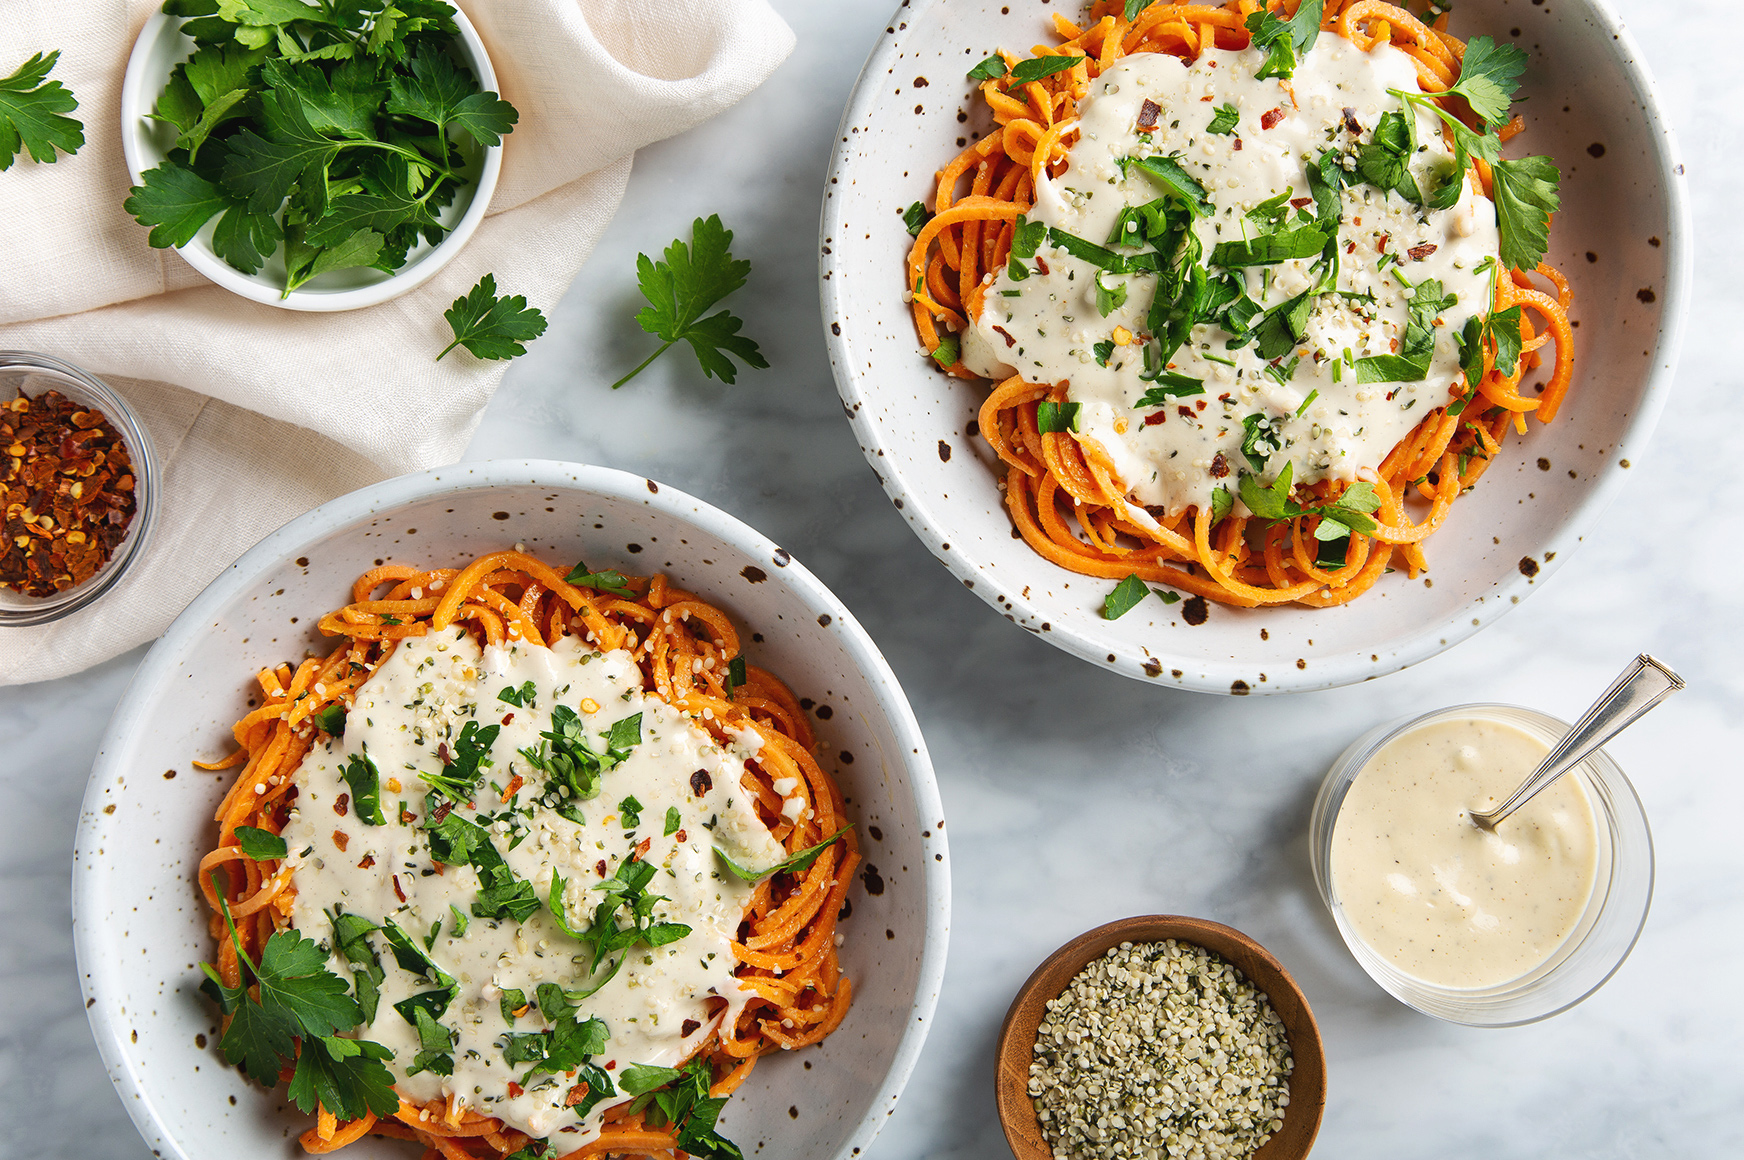 Healthy Sweet Potato Noodles with 5-Minute Vegan Alfredo Sauce! You're going to want to put this sauce on everything! | picklesnhoney.com #sweetpotato #noodles #vegan #alfredo #sauce #recipe #glutenfree #noodles #lunch #dinner